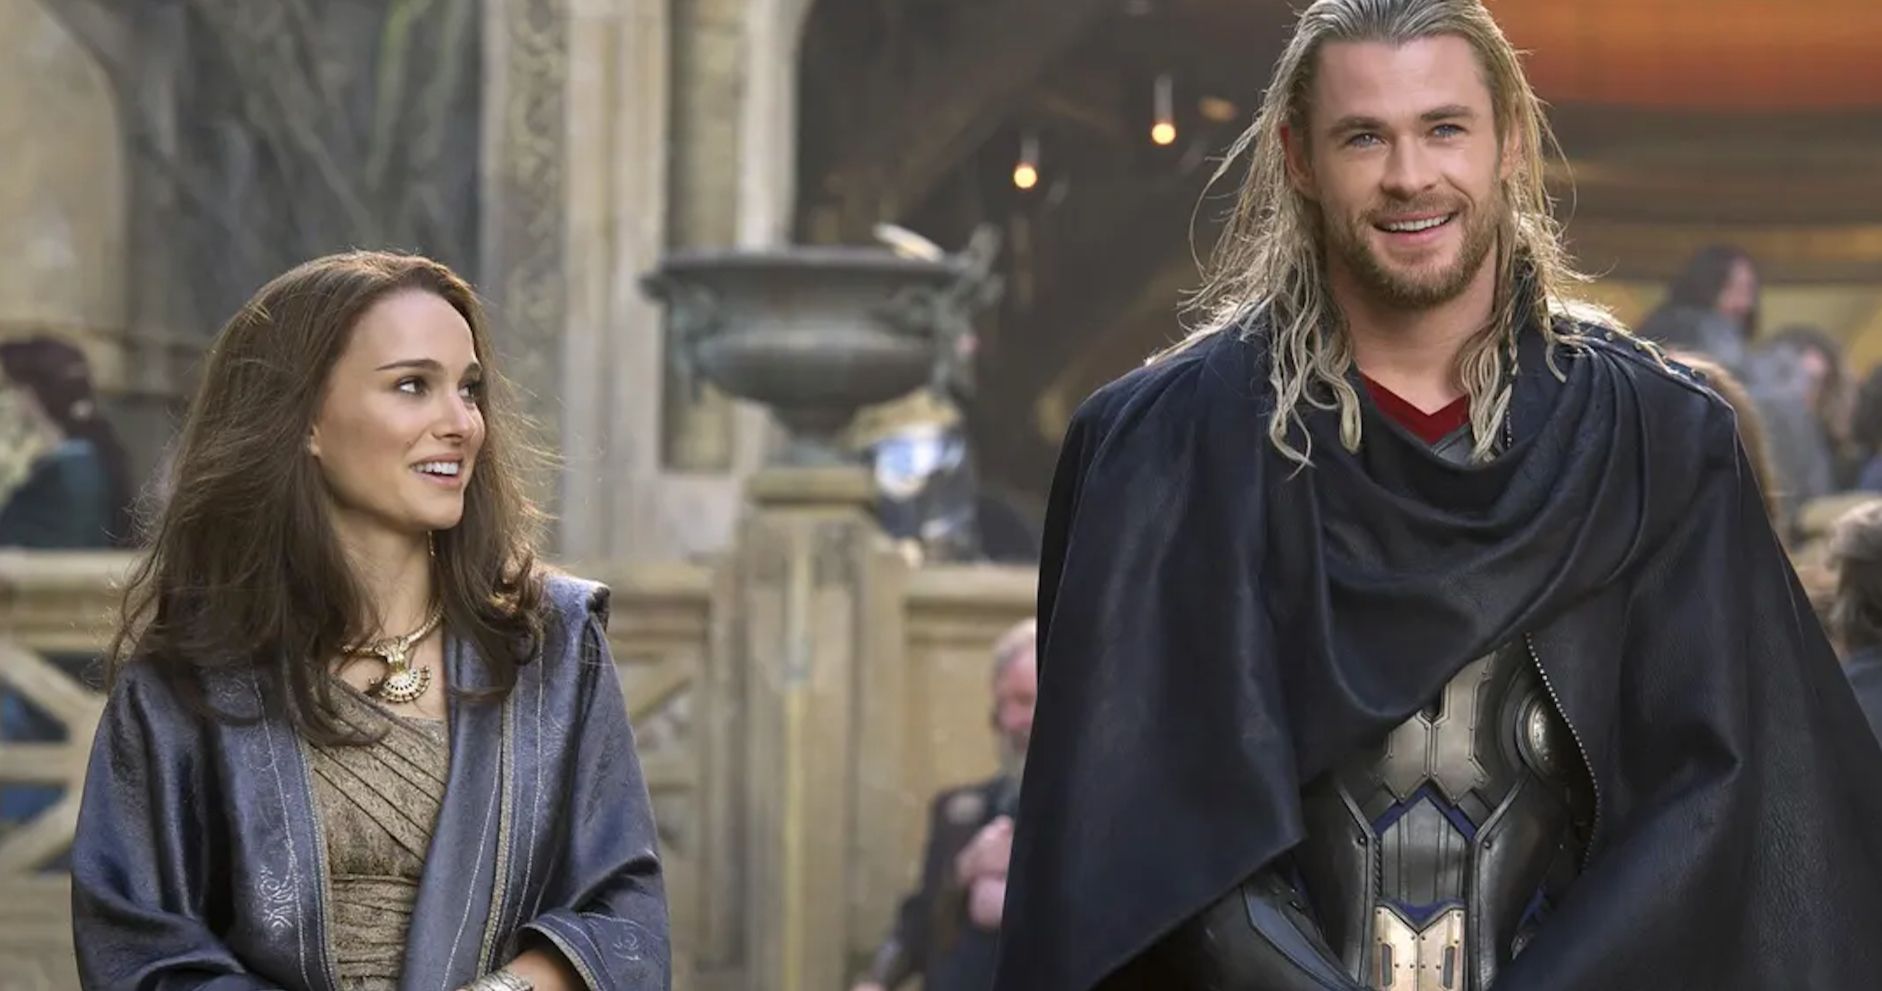 Natalie Portman Fears The Mighty Thor Will Look Like a Little Grandma Next to Chris Hemsworth